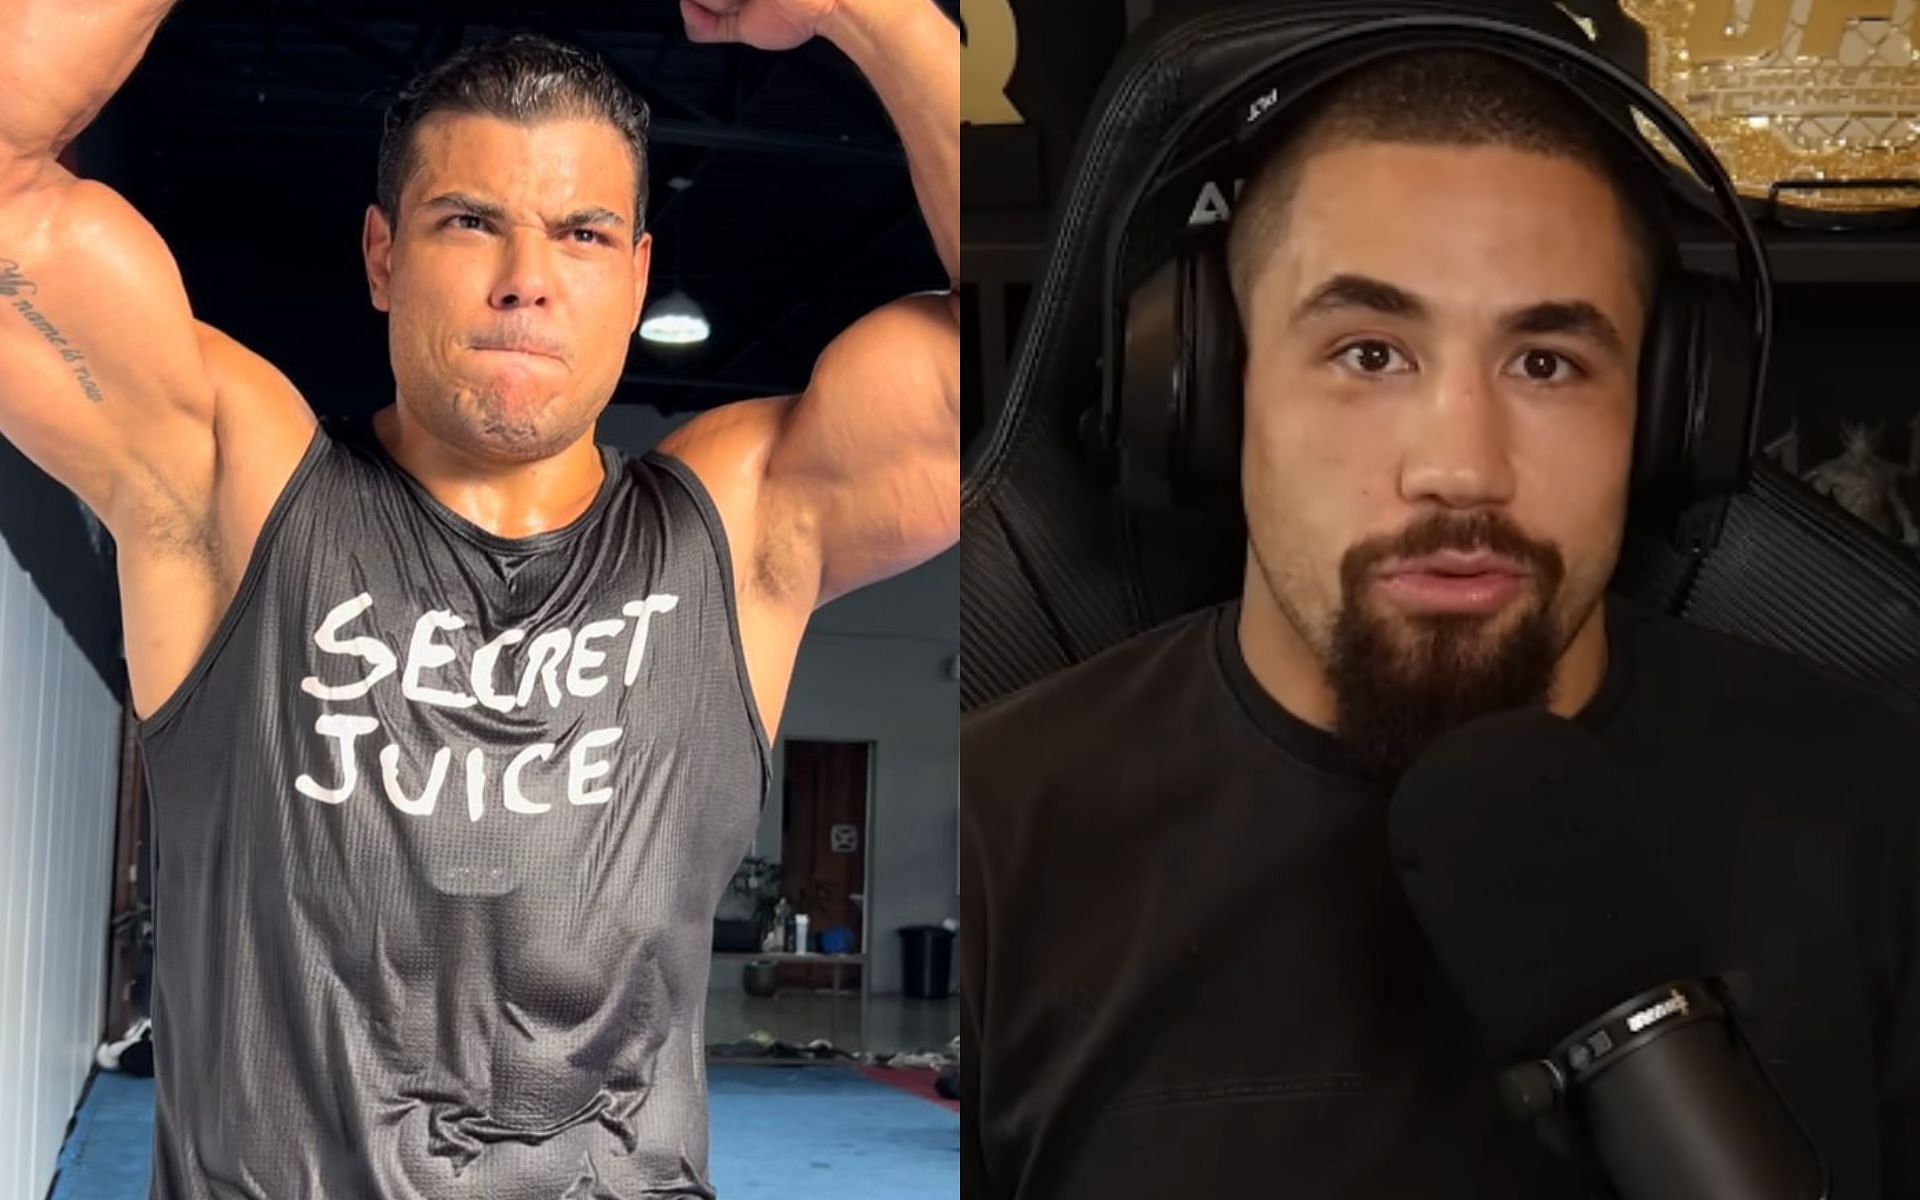 Rober Whittaker [Right] predicts he will finish Paulo Costa [Left] at UFC 298 [Image courtesy: MMArcade Podcast - YouTube, and @BorrachinhaMMA - X]